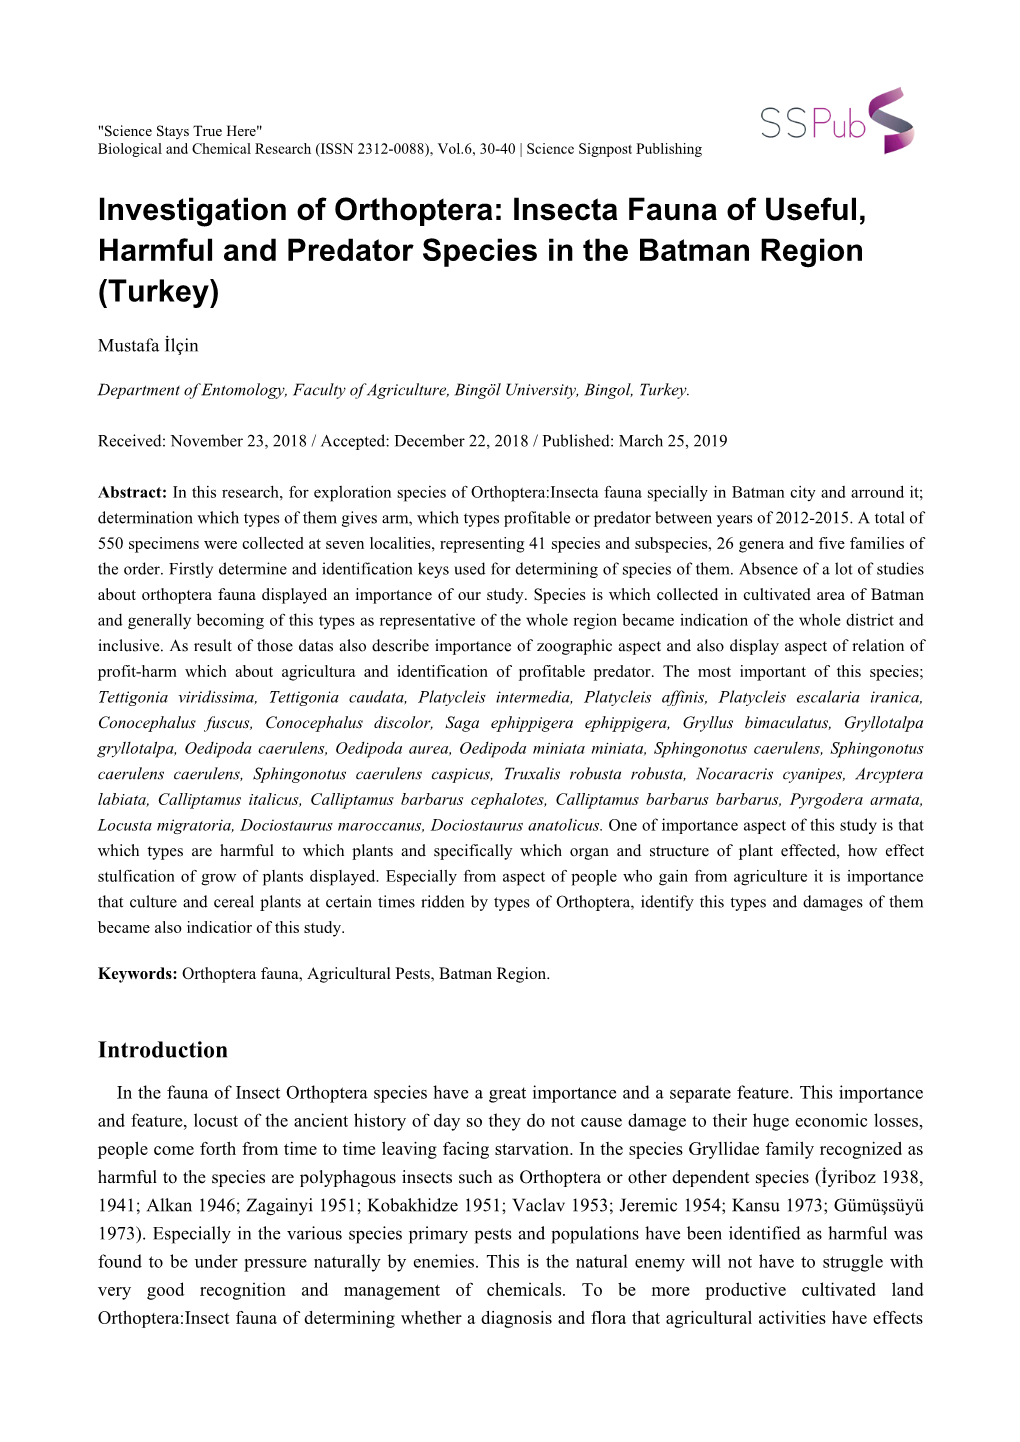 Investigation of Orthoptera: Insecta Fauna of Useful, Harmful and Predator Species in the Batman Region (Turkey)